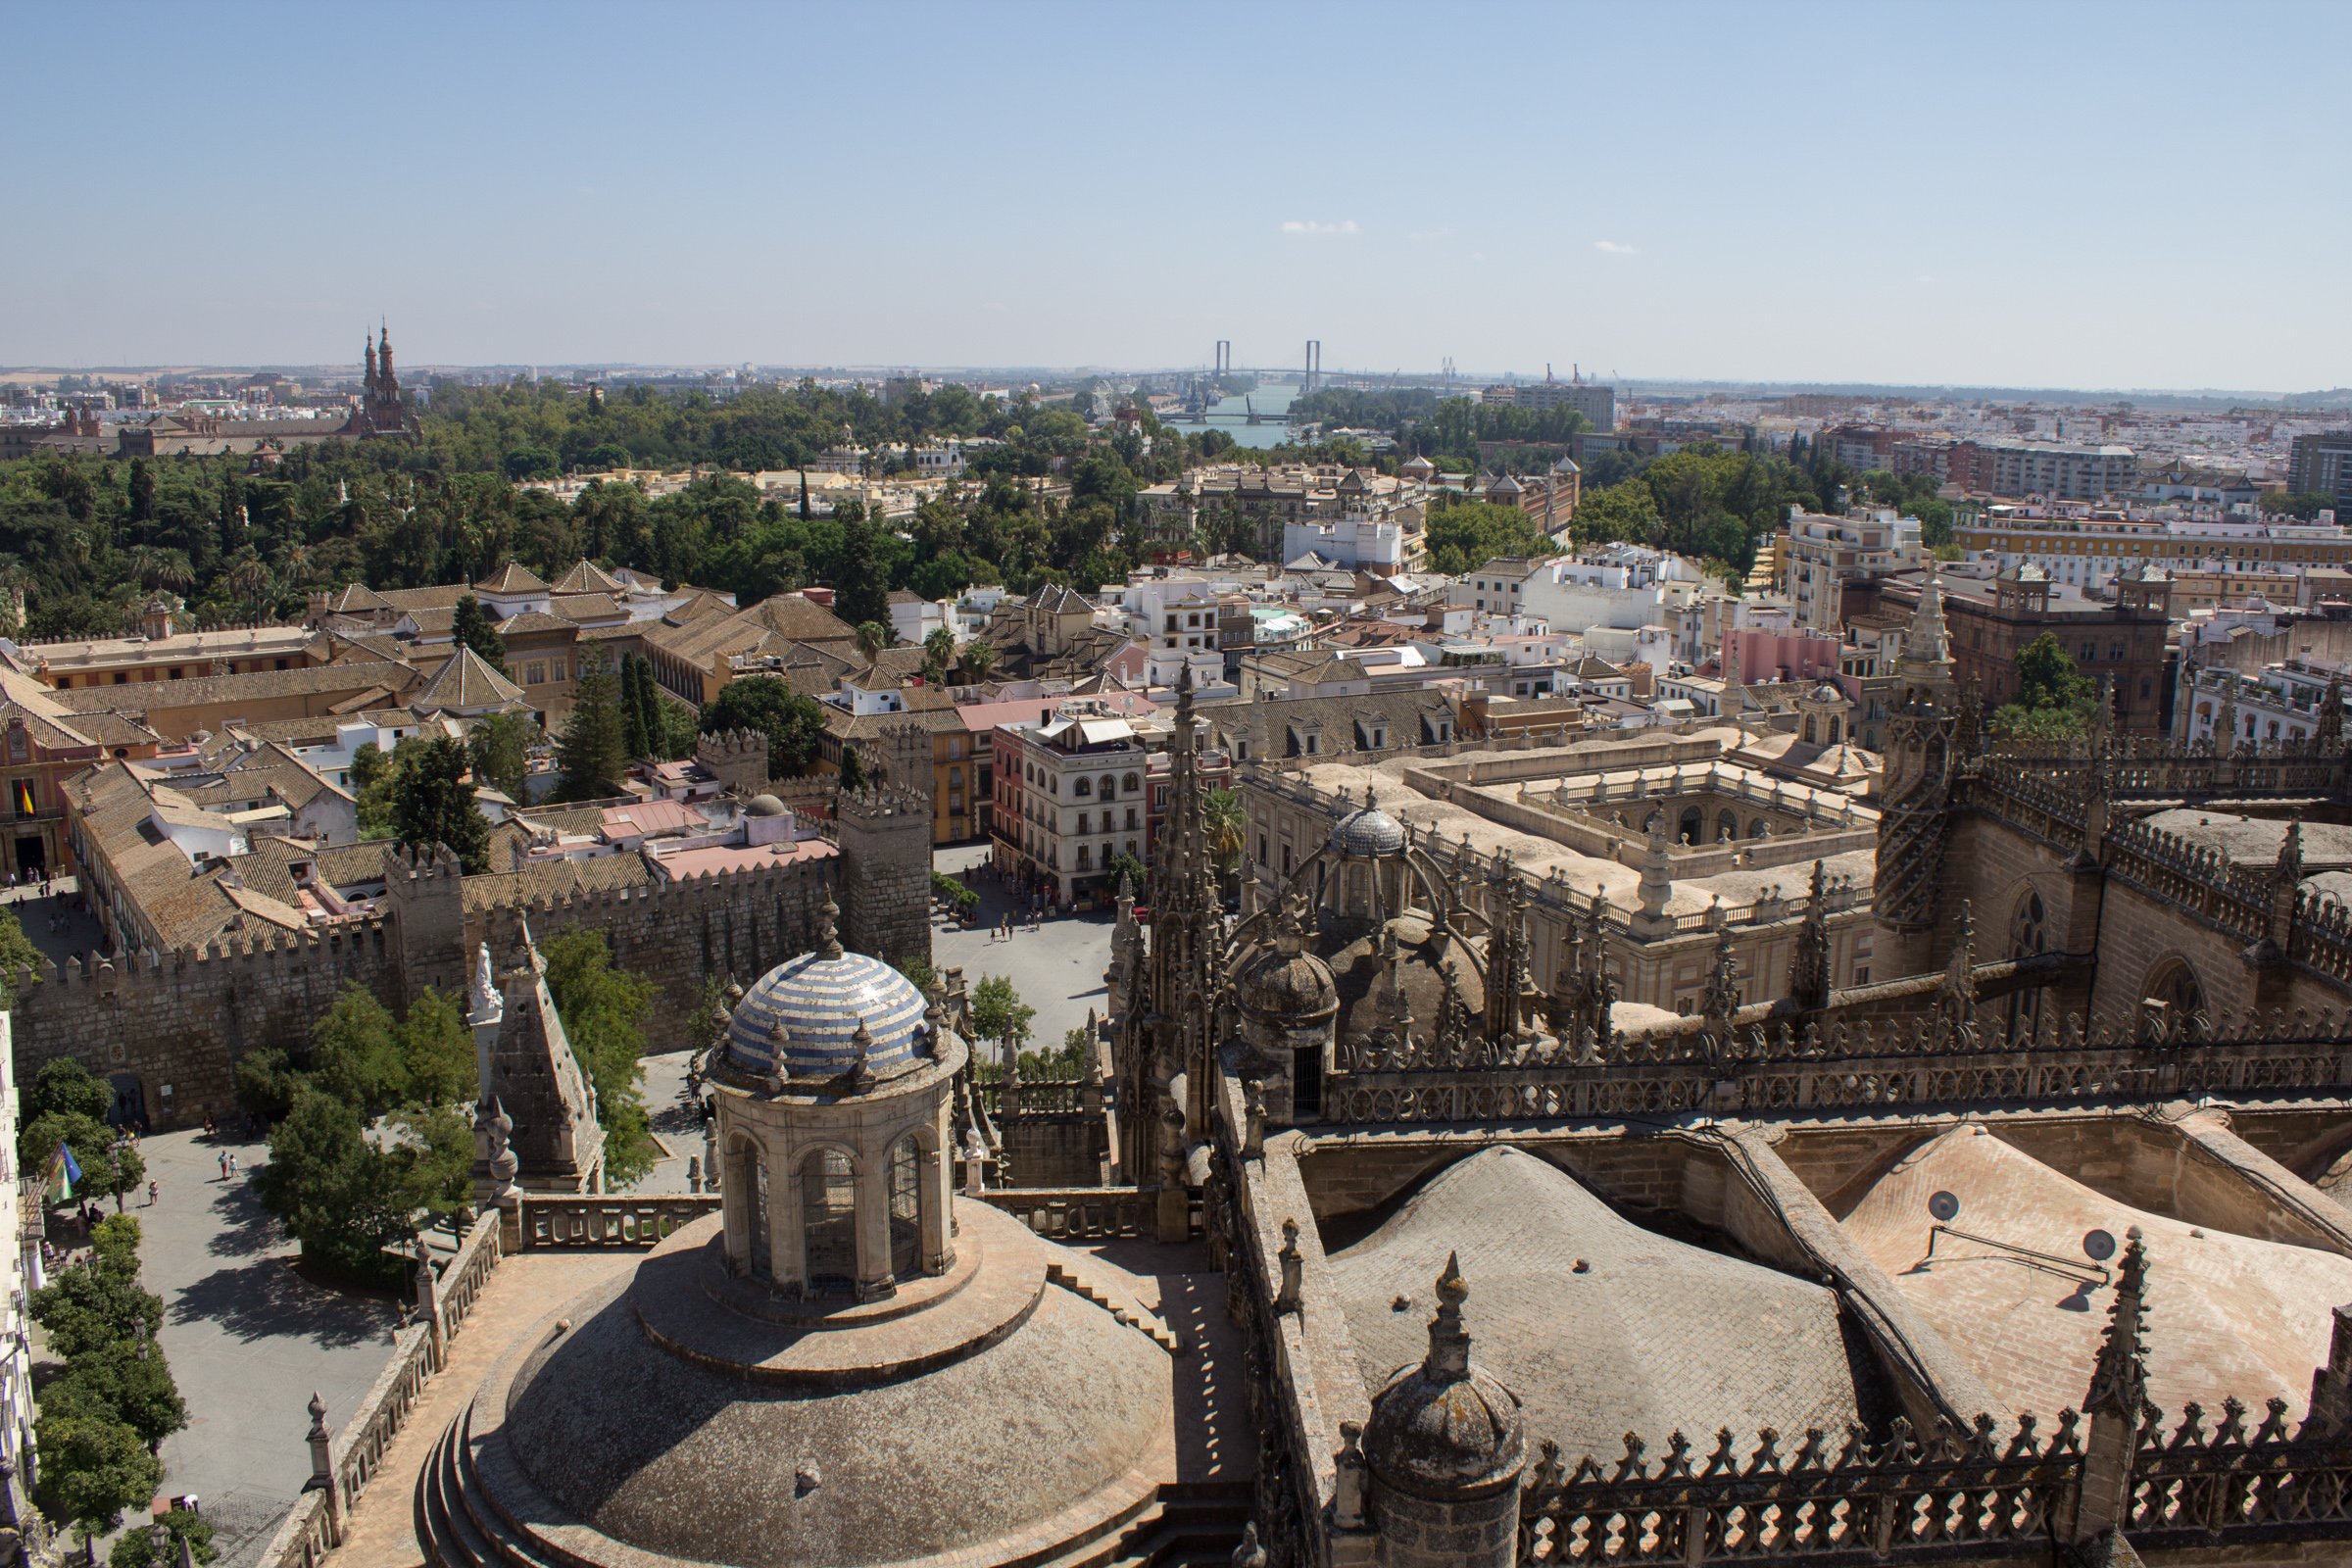 A view of Sevilla from the top of La Gerald